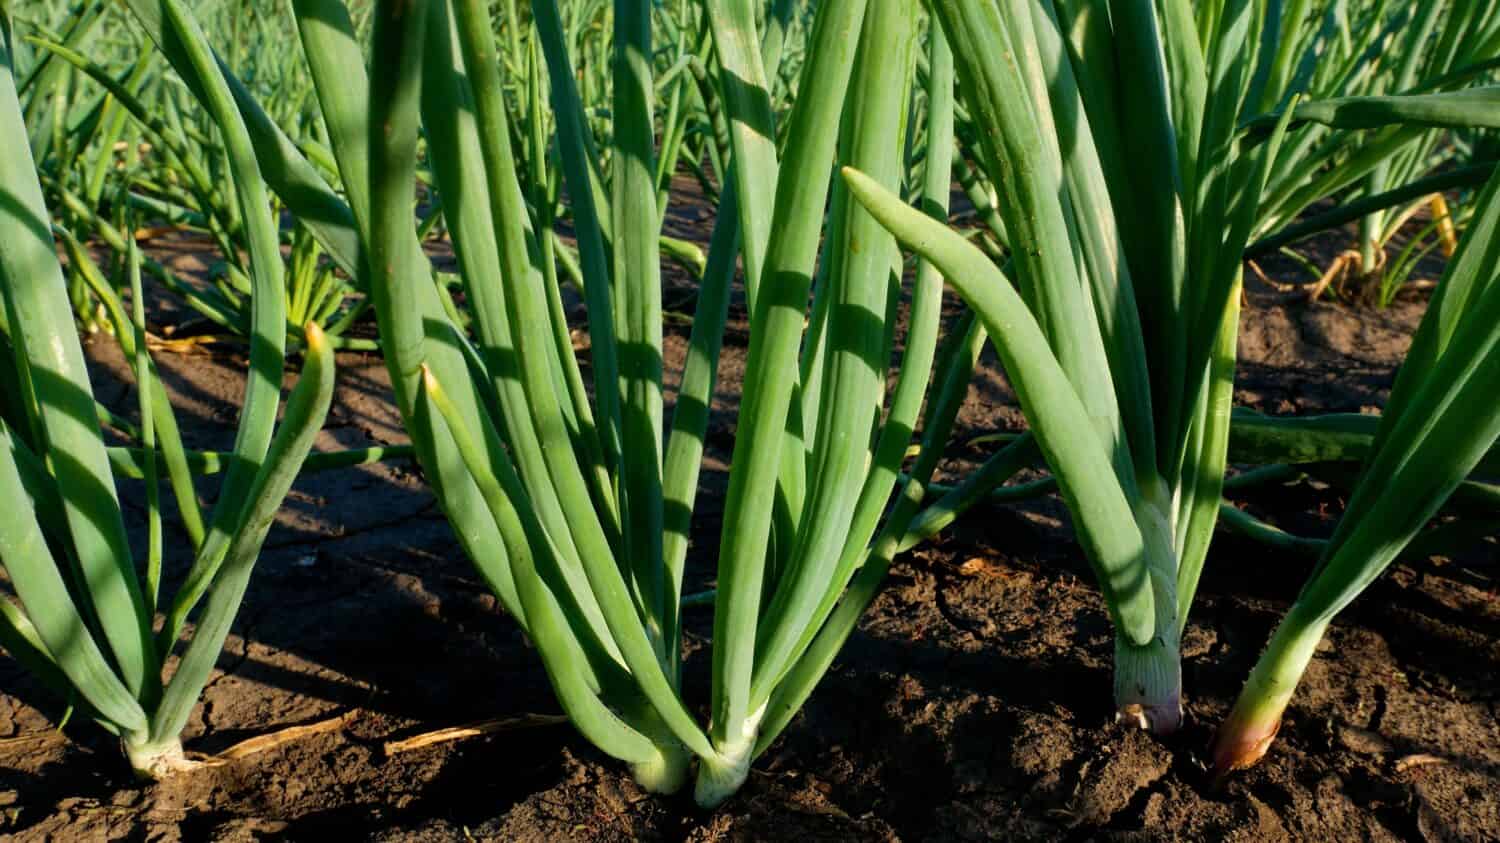 Green onions grow in the garden. Growing greens. Organic vegetables and herbs for the kitchen